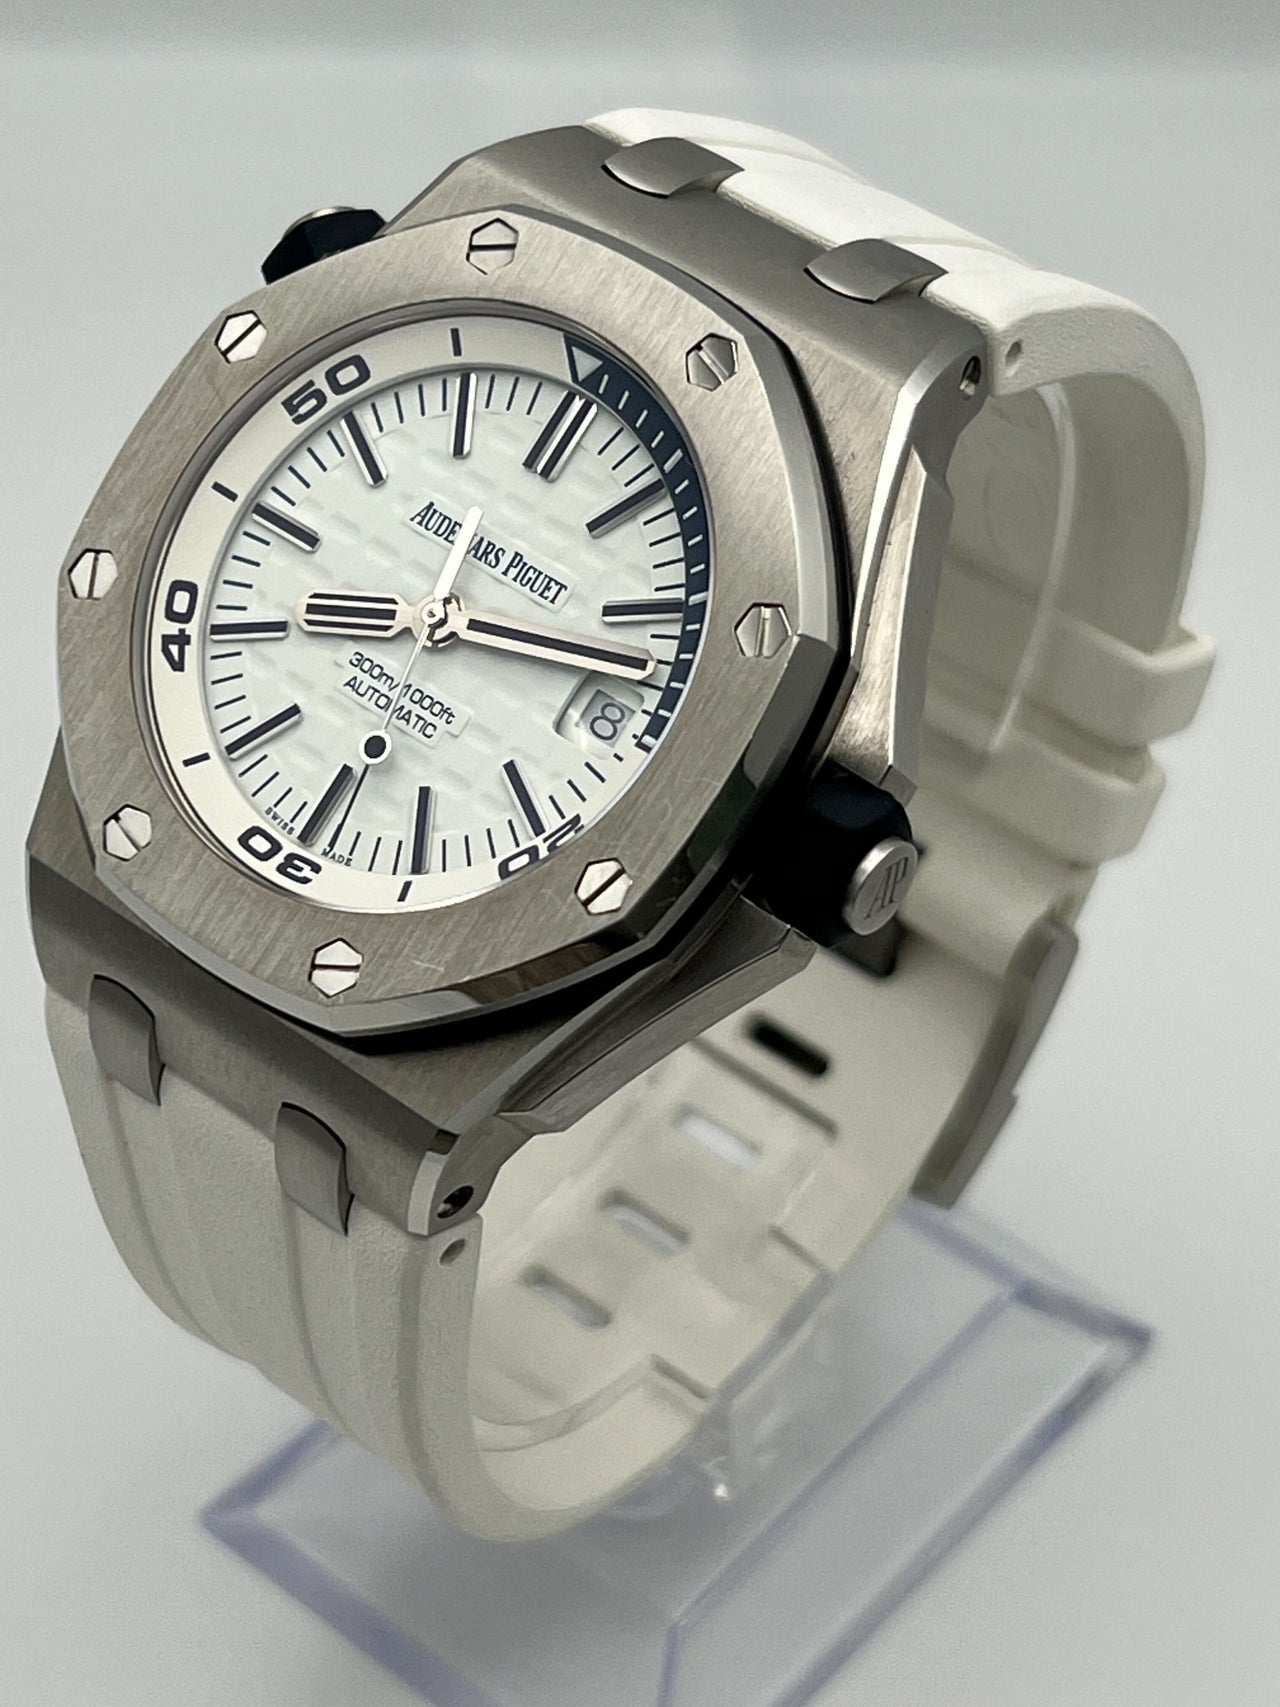 Audemars Piguet Royal Oak Offshore Diver Stainless Steel White Dial 15710ST.OO.A010CA.01